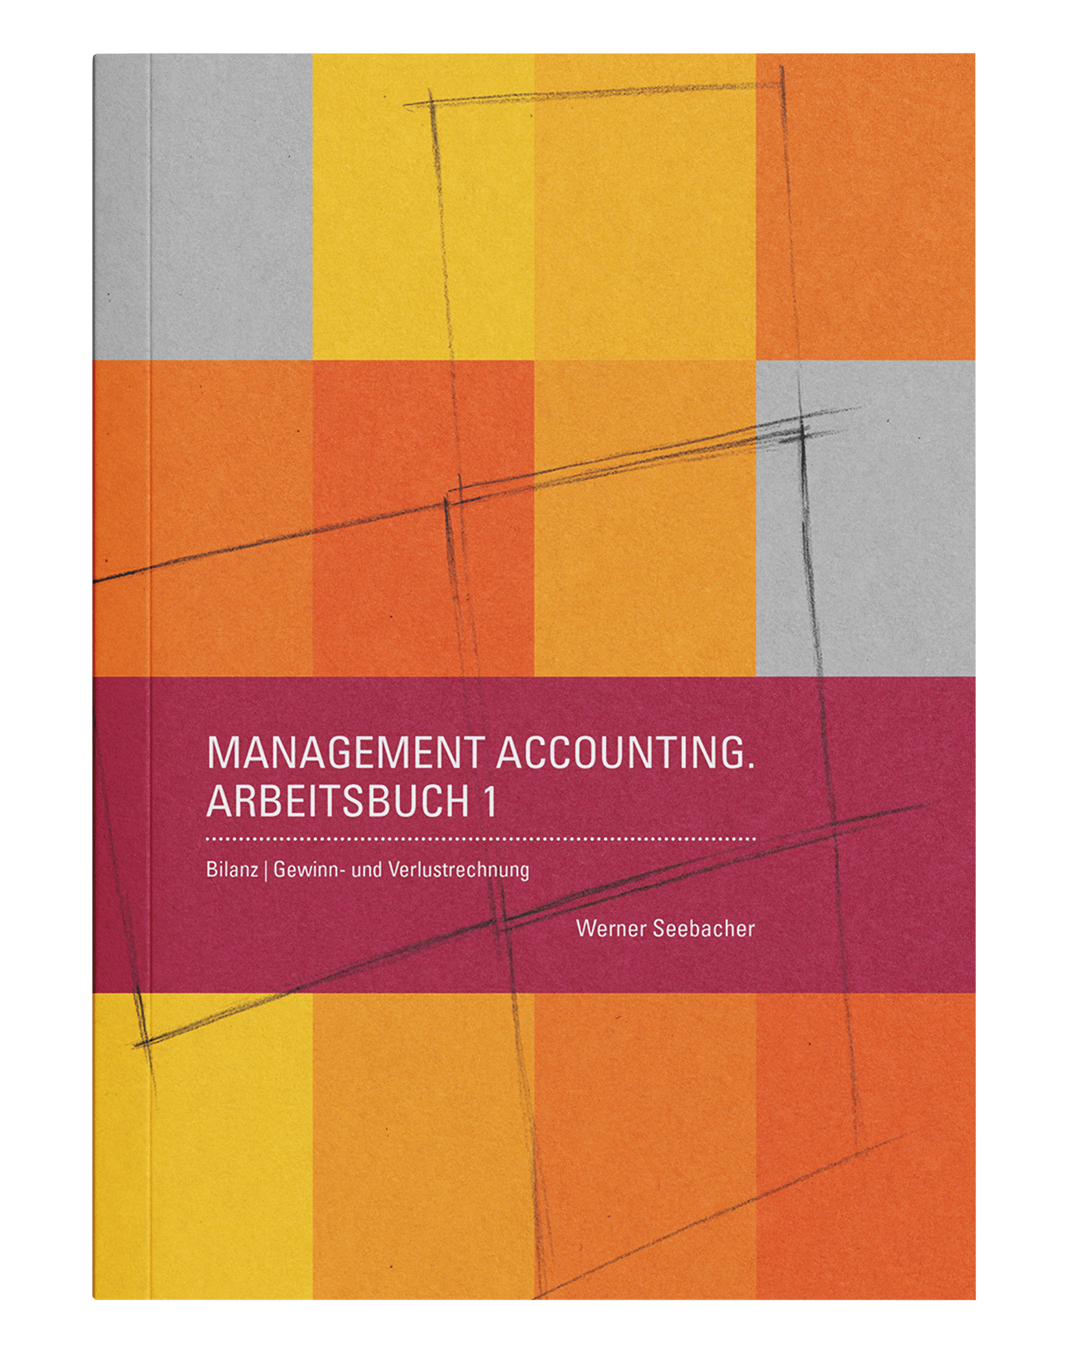 Management-Accounting, Arbeitsbuch 1